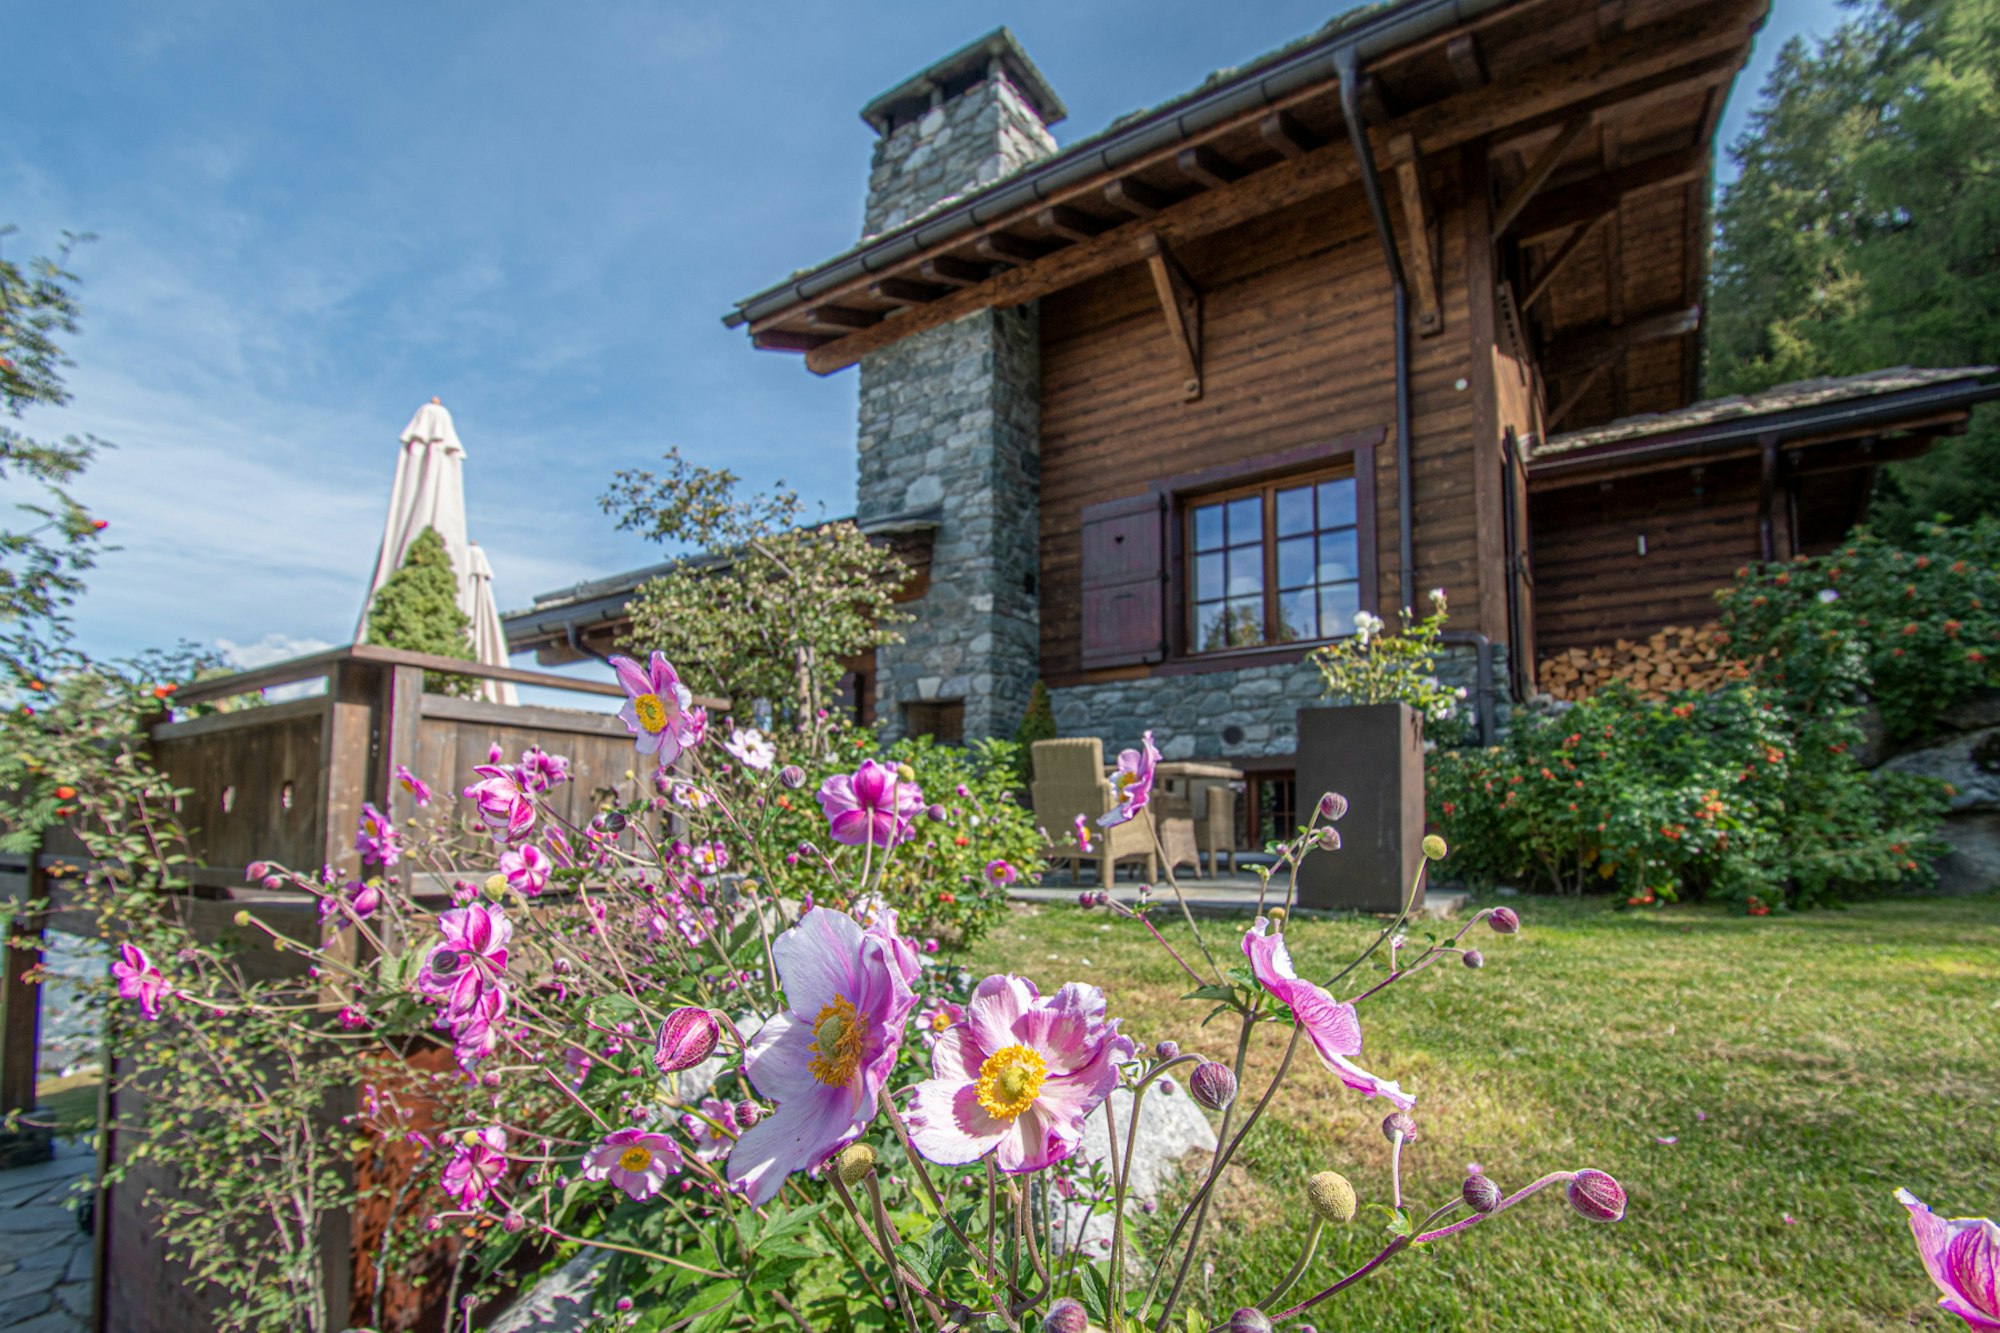 What are Swiss Alps buyers looking for now in an alpine home?